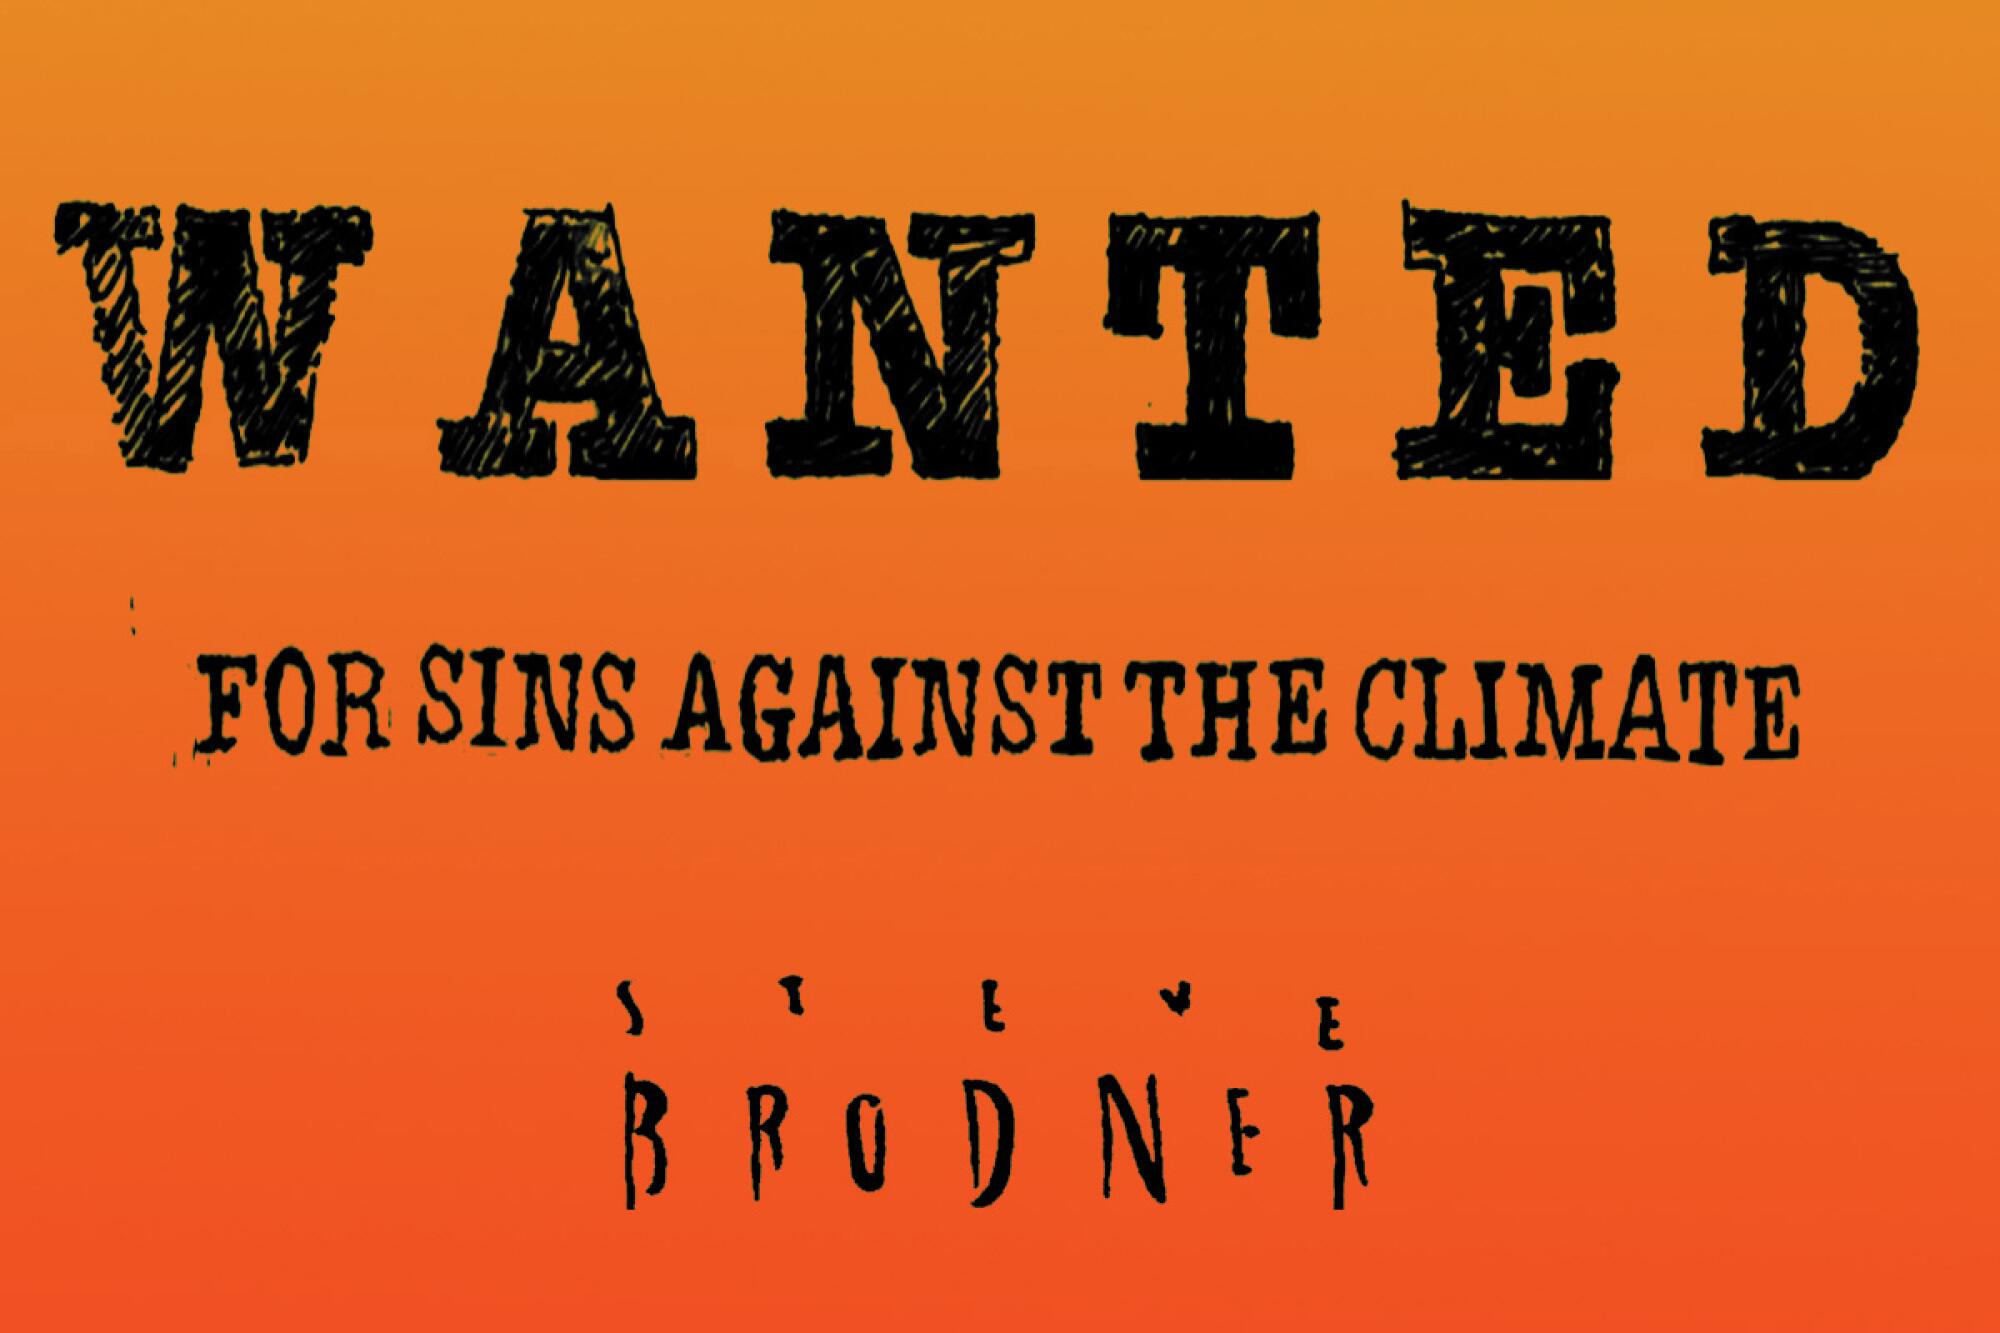 The title card of an Op-Comic by Steve Brodner: "Wanted, for sins against the climate" 